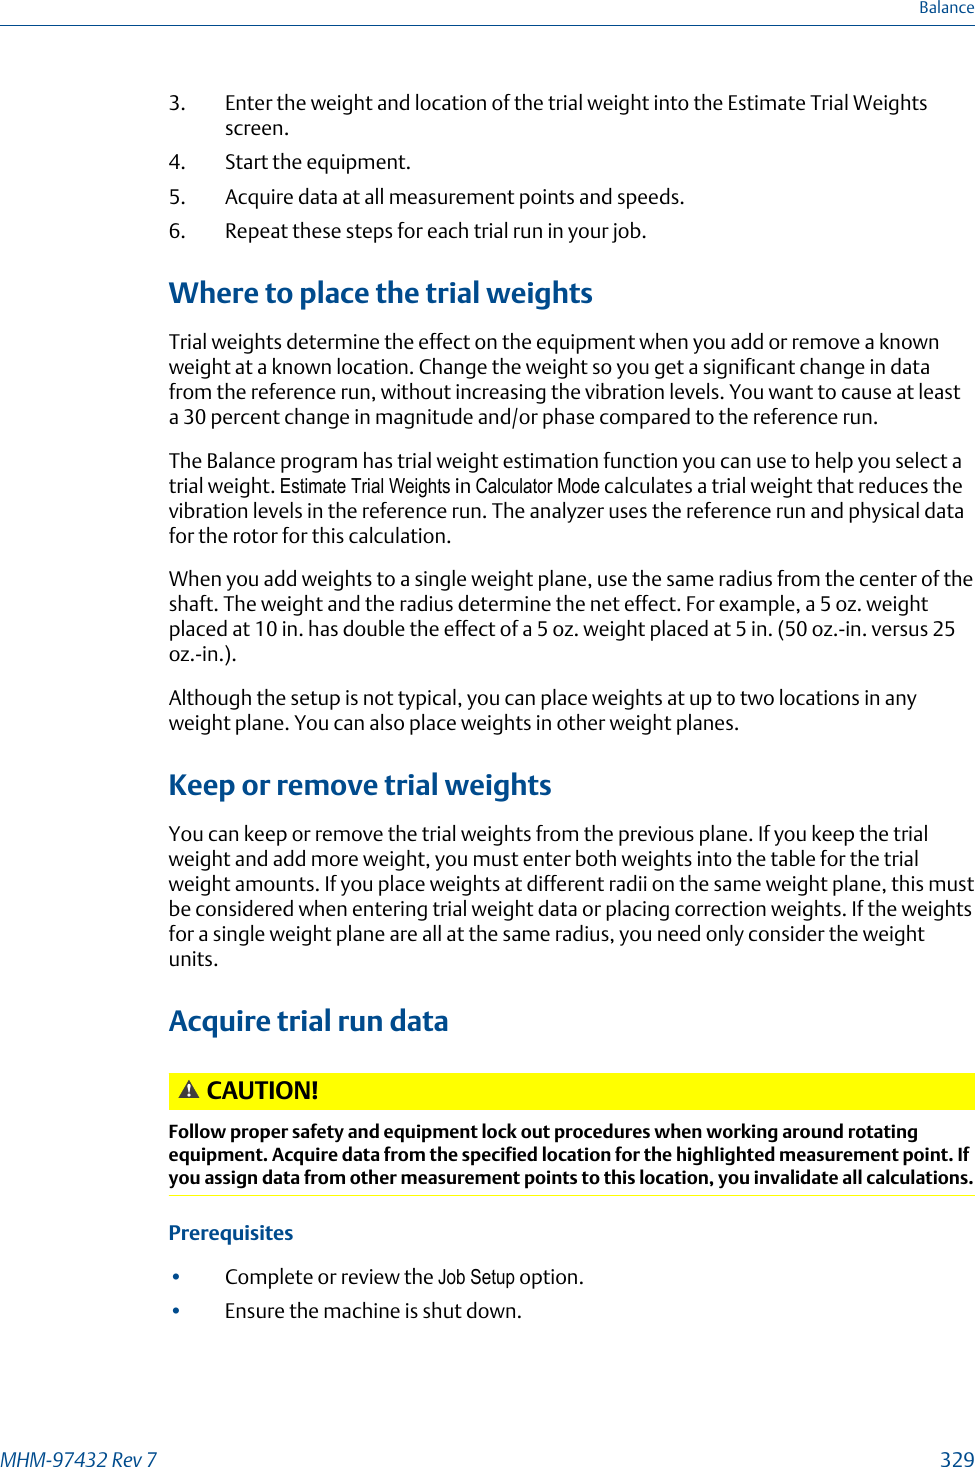 3. Enter the weight and location of the trial weight into the Estimate Trial Weightsscreen.4. Start the equipment.5. Acquire data at all measurement points and speeds.6. Repeat these steps for each trial run in your job.Where to place the trial weightsTrial weights determine the effect on the equipment when you add or remove a knownweight at a known location. Change the weight so you get a significant change in datafrom the reference run, without increasing the vibration levels. You want to cause at leasta 30 percent change in magnitude and/or phase compared to the reference run.The Balance program has trial weight estimation function you can use to help you select atrial weight. Estimate Trial Weights in Calculator Mode calculates a trial weight that reduces thevibration levels in the reference run. The analyzer uses the reference run and physical datafor the rotor for this calculation.When you add weights to a single weight plane, use the same radius from the center of theshaft. The weight and the radius determine the net effect. For example, a 5 oz. weightplaced at 10 in. has double the effect of a 5 oz. weight placed at 5 in. (50 oz.-in. versus 25oz.-in.).Although the setup is not typical, you can place weights at up to two locations in anyweight plane. You can also place weights in other weight planes.Keep or remove trial weightsYou can keep or remove the trial weights from the previous plane. If you keep the trialweight and add more weight, you must enter both weights into the table for the trialweight amounts. If you place weights at different radii on the same weight plane, this mustbe considered when entering trial weight data or placing correction weights. If the weightsfor a single weight plane are all at the same radius, you need only consider the weightunits.Acquire trial run dataCAUTION!Follow proper safety and equipment lock out procedures when working around rotatingequipment. Acquire data from the specified location for the highlighted measurement point. Ifyou assign data from other measurement points to this location, you invalidate all calculations.Prerequisites•Complete or review the Job Setup option.•Ensure the machine is shut down.BalanceMHM-97432 Rev 7  329